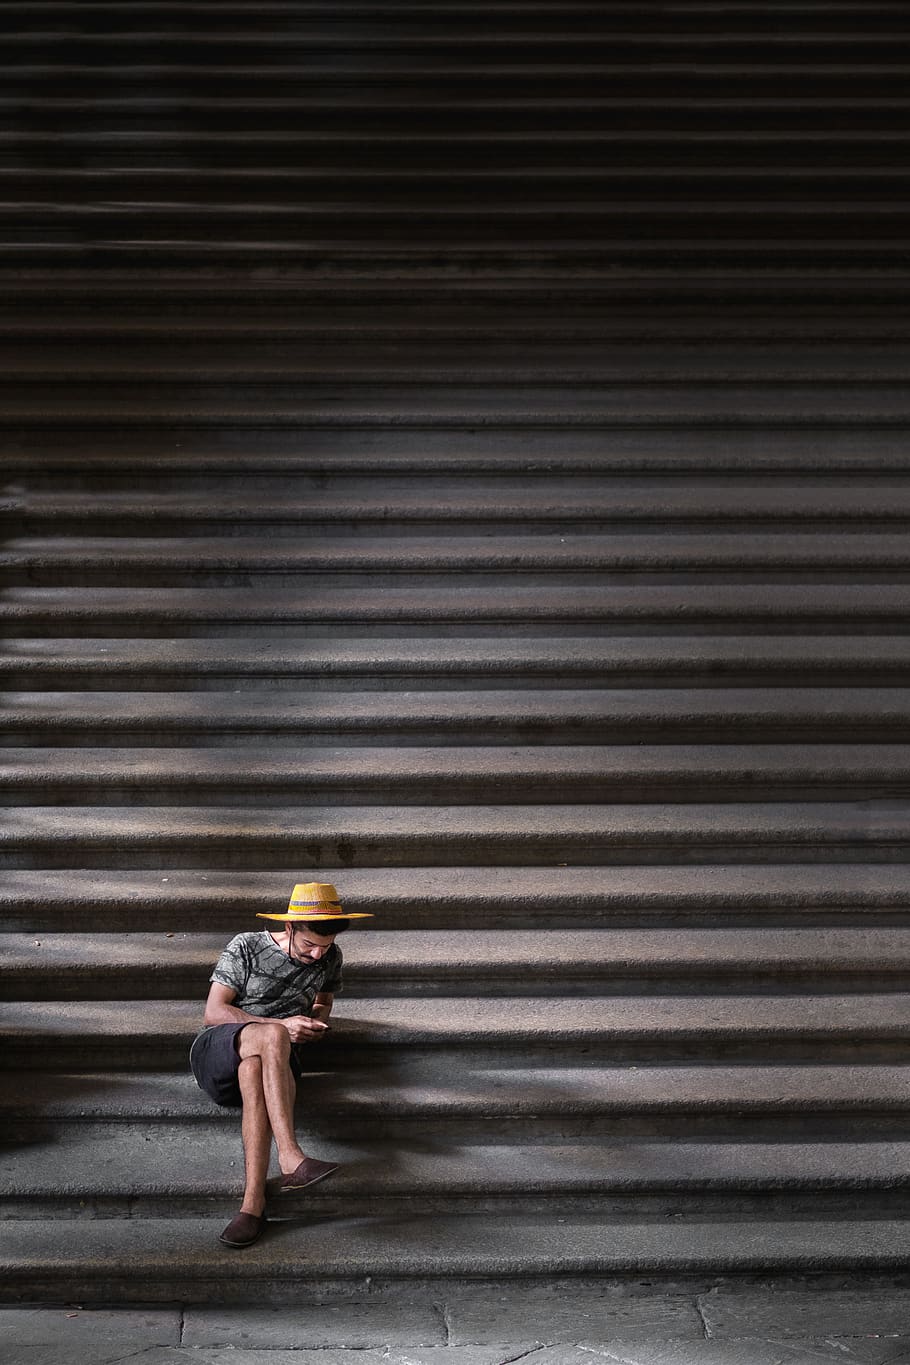 stairs, stairway, people, man, alone, sitting, texting, one person, full length, architecture